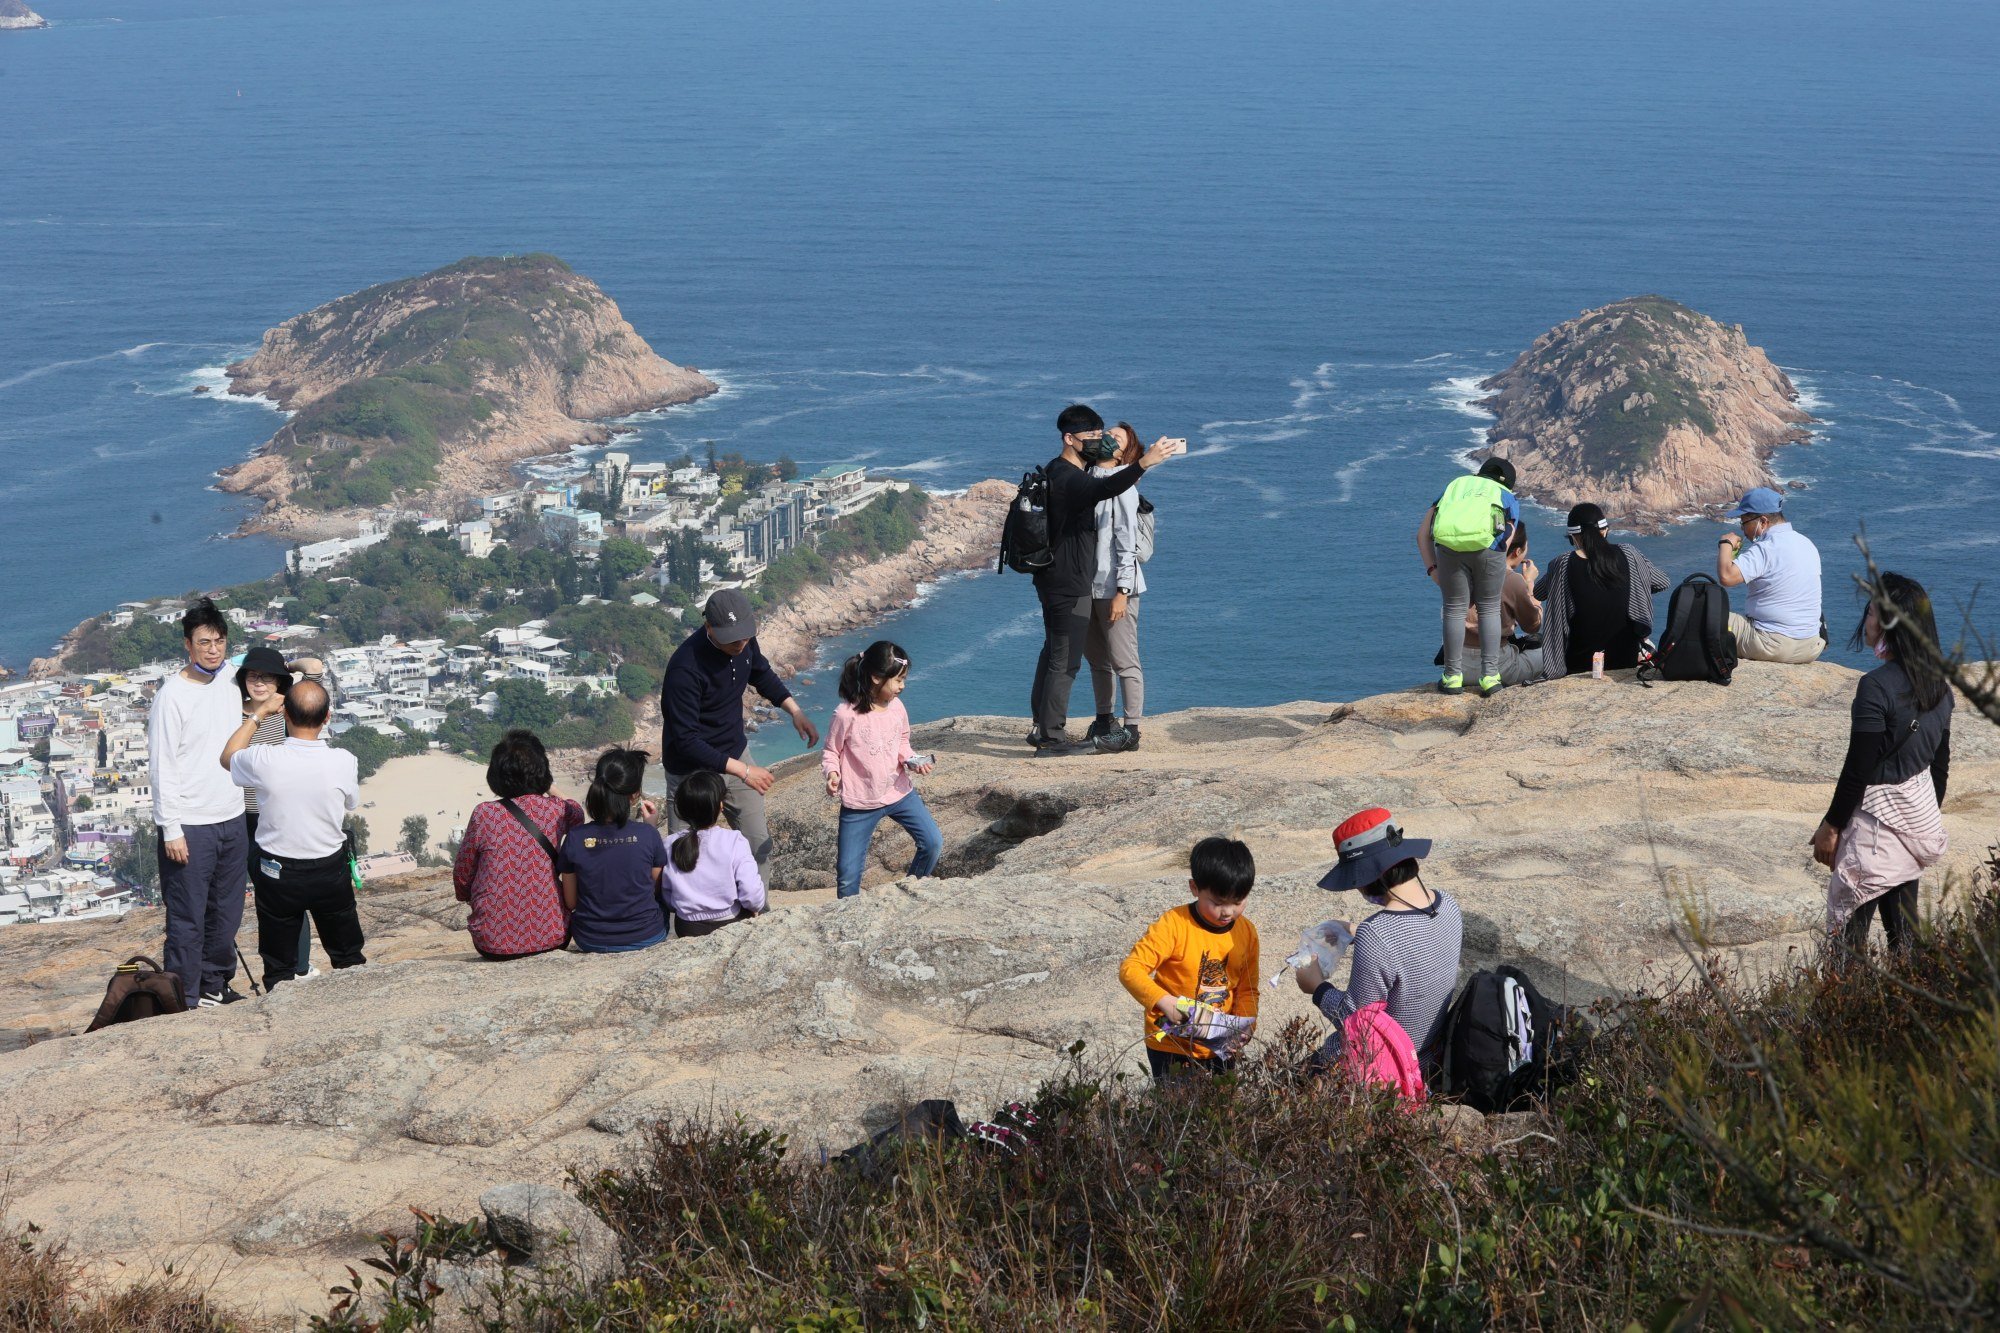 Hikers enjoy the sunny weather on the Dragon’s Back trail in Shek O. Photo: Dickson Lee